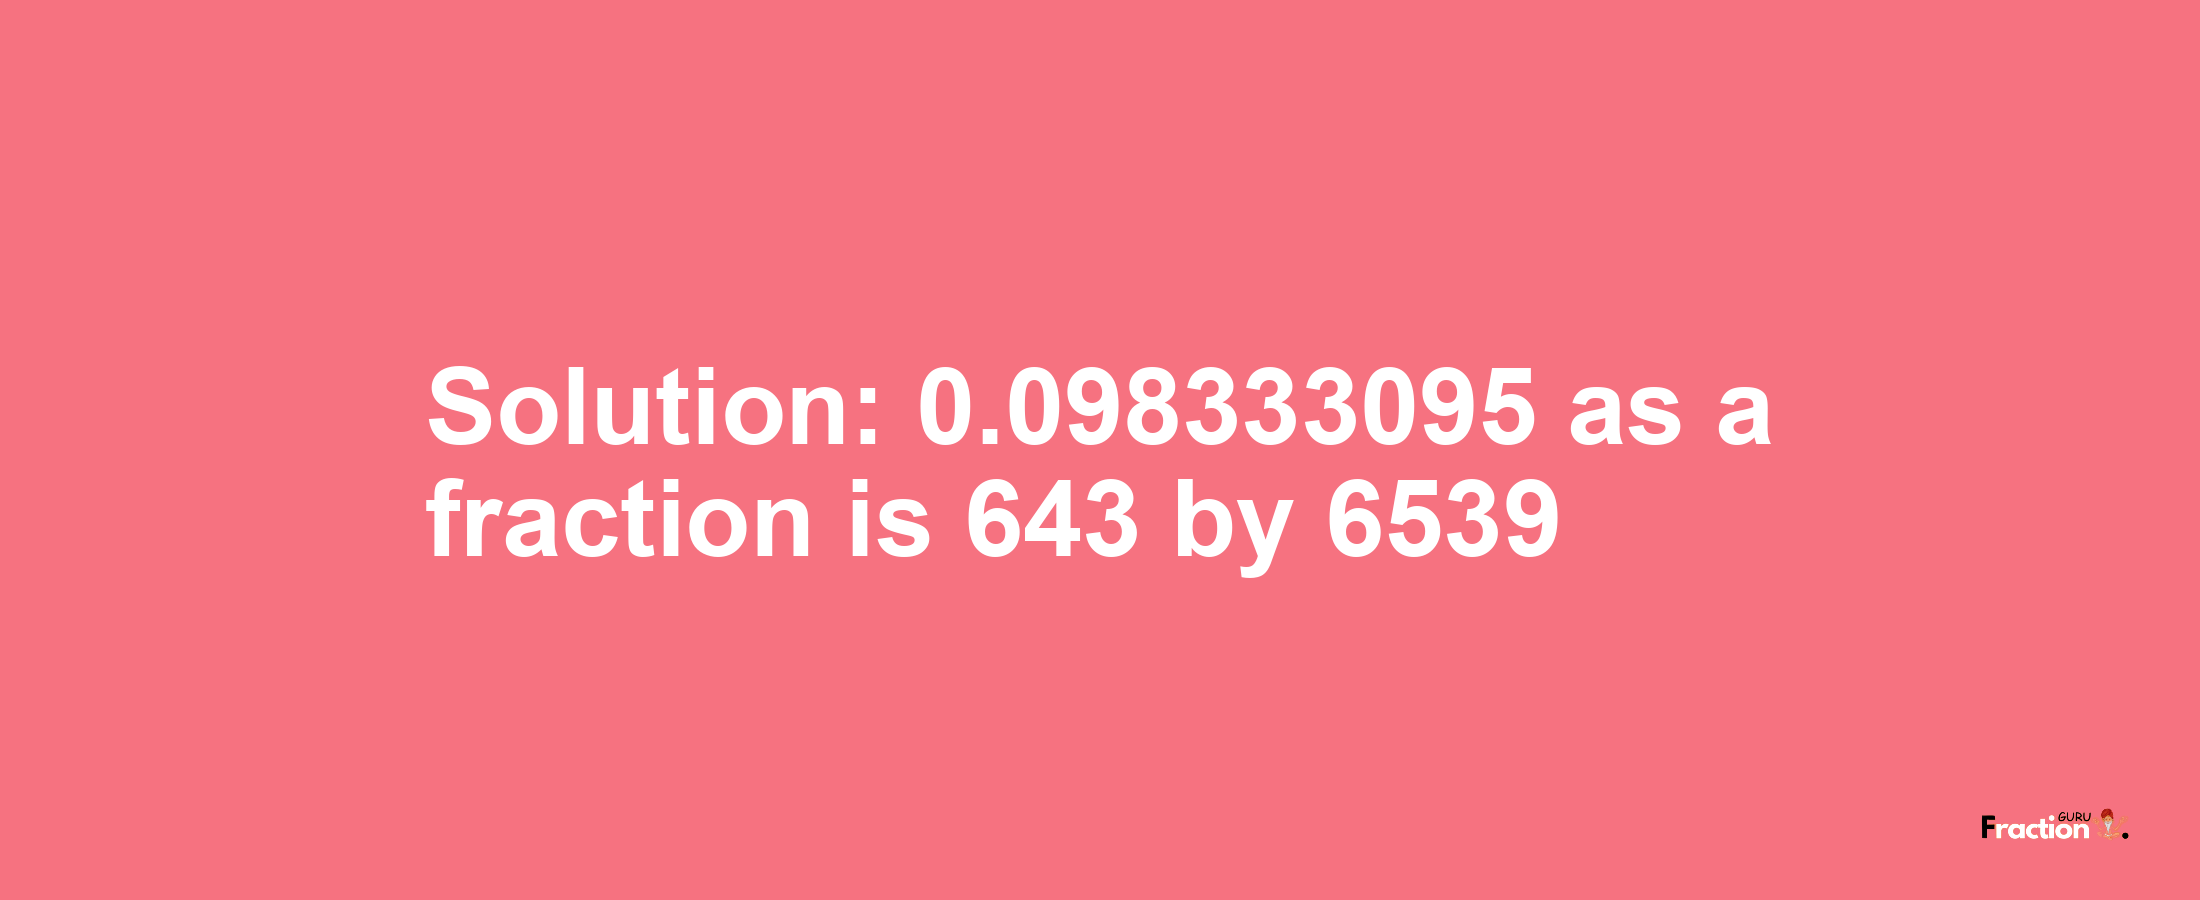 Solution:0.098333095 as a fraction is 643/6539